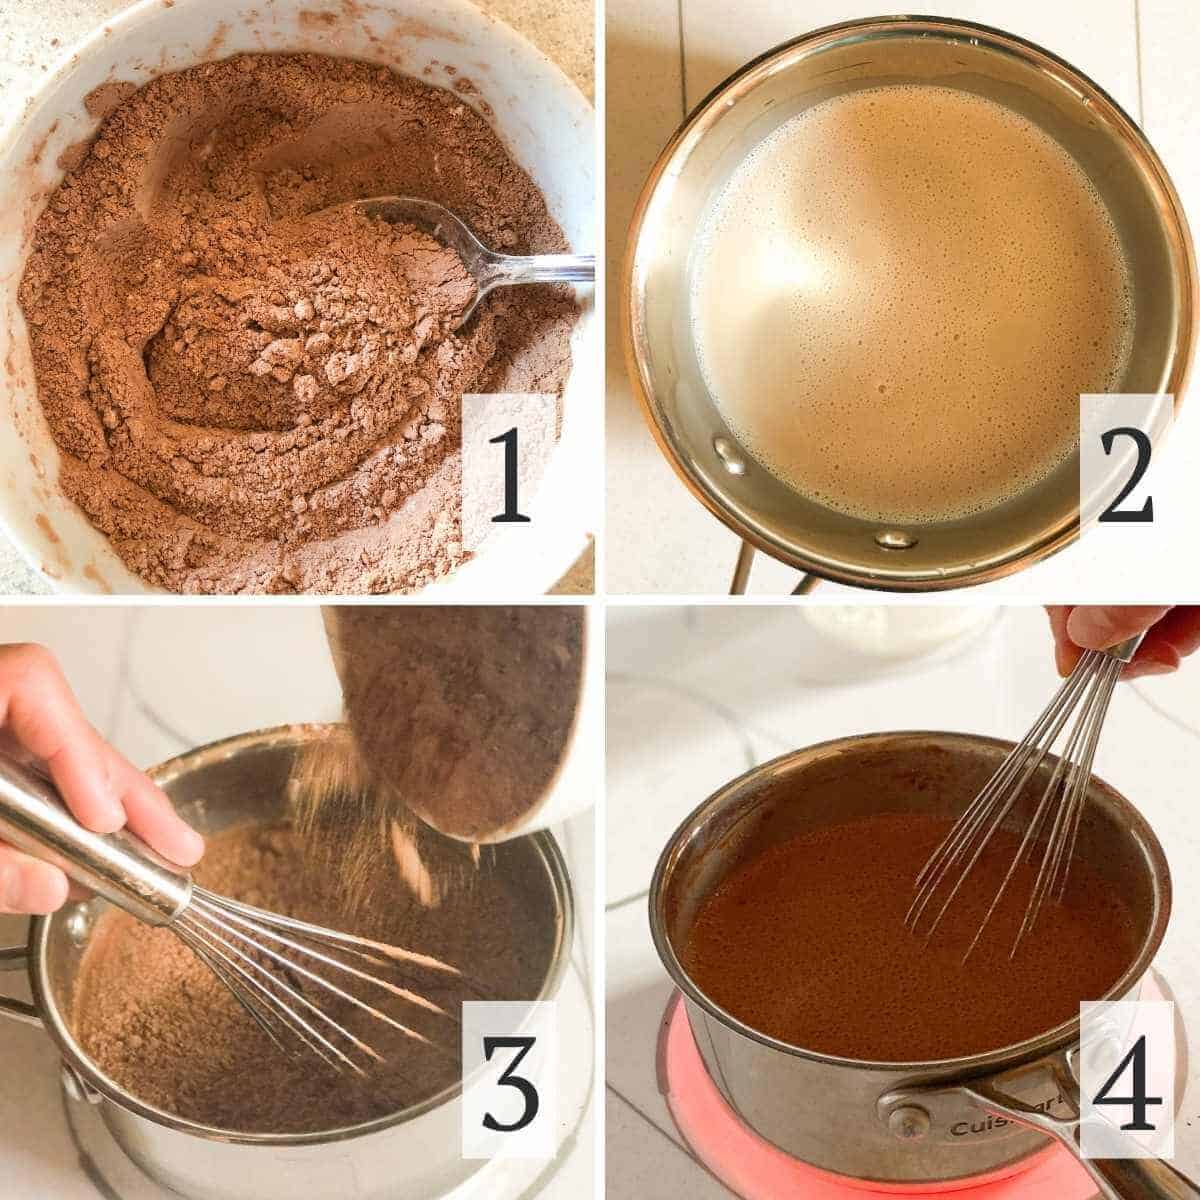 Steps 1 through 4 for making chocolate oat milk pudding